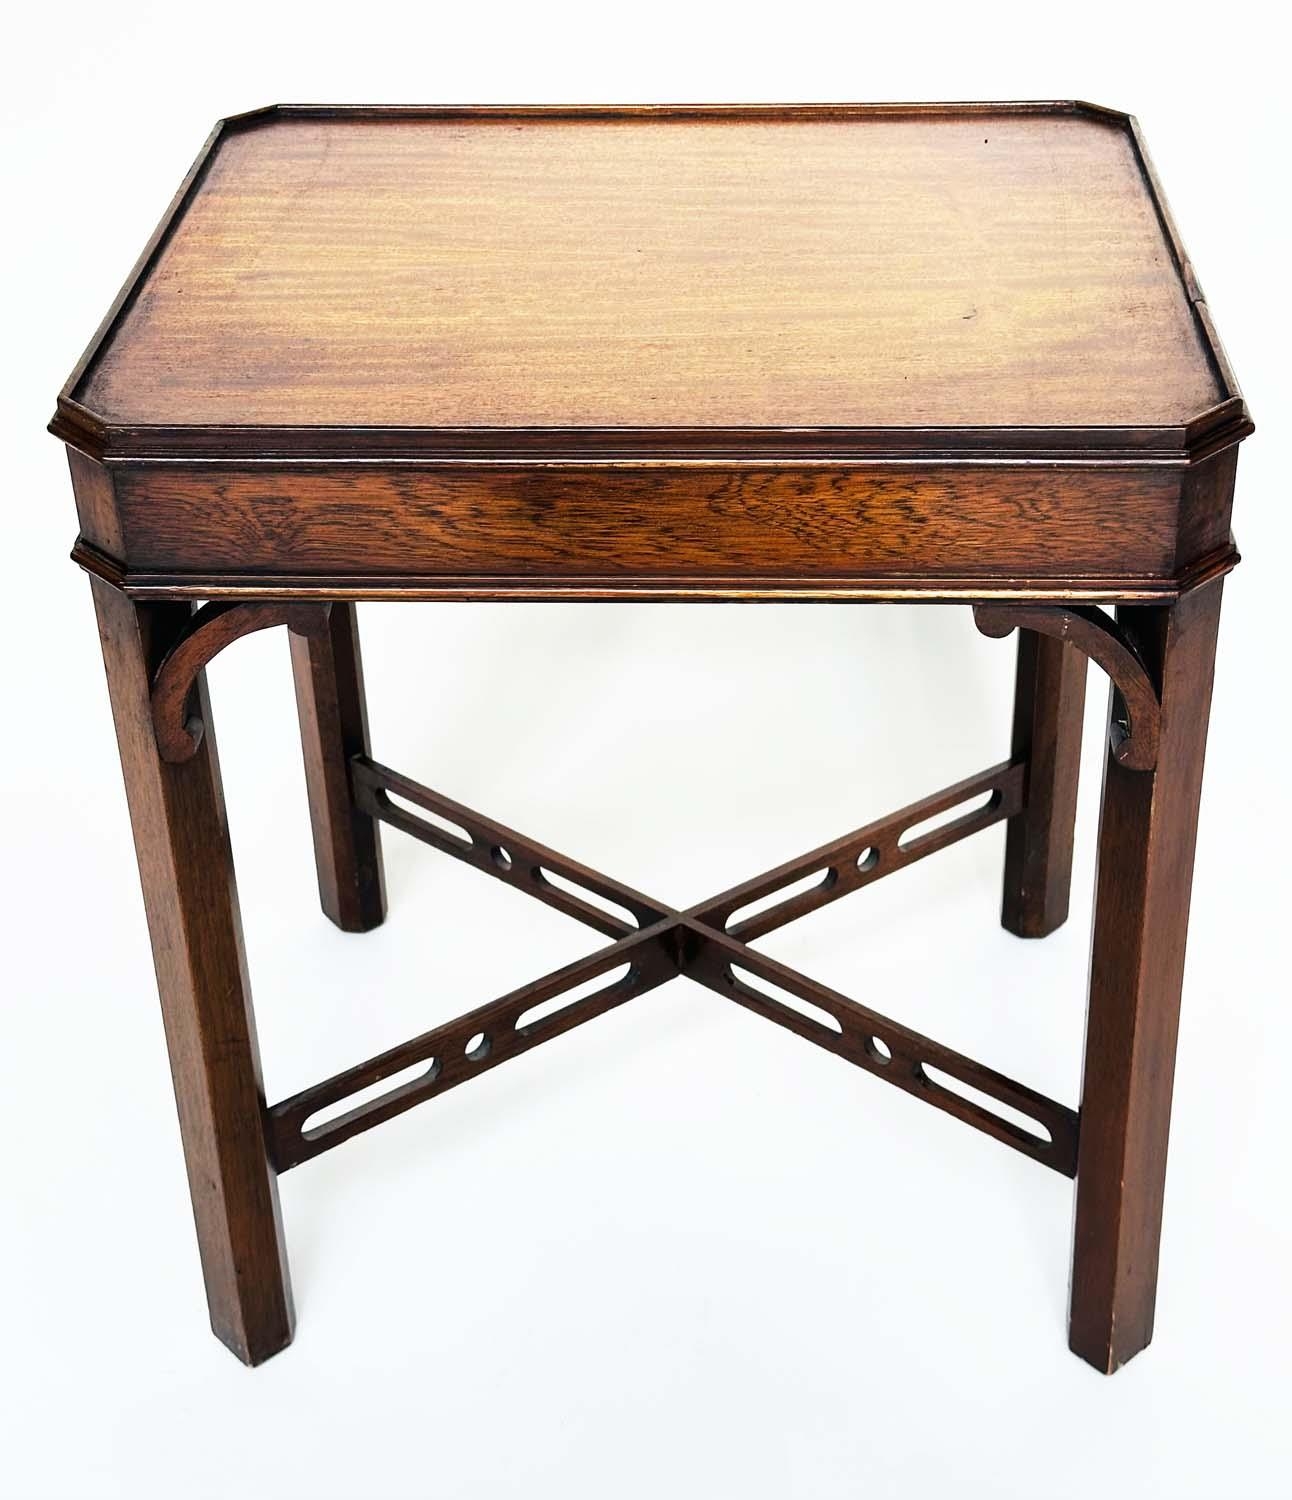 LAMP TABLES, a pair, George III design mahogany each with canted corners and pierced 'X' stretchers, - Image 6 of 9